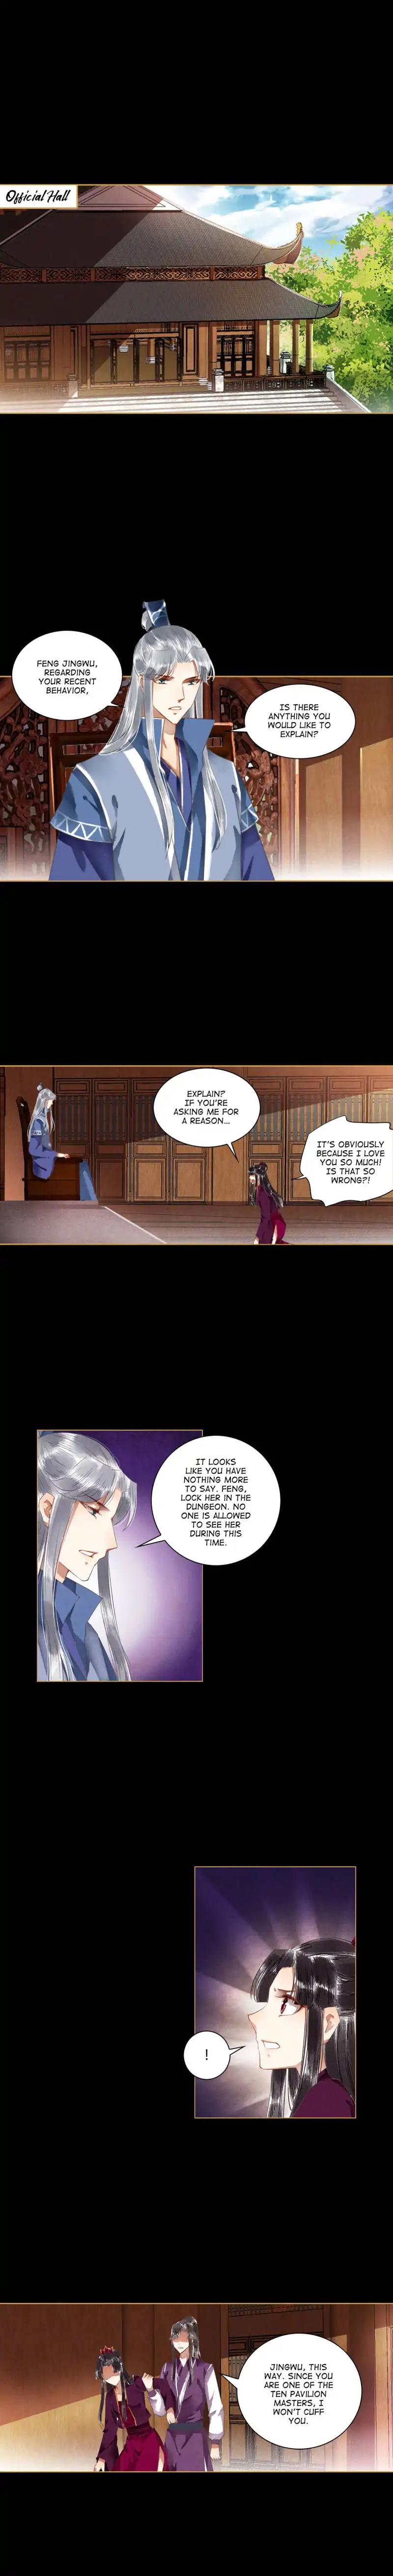 The Favored Concubine - Page 1